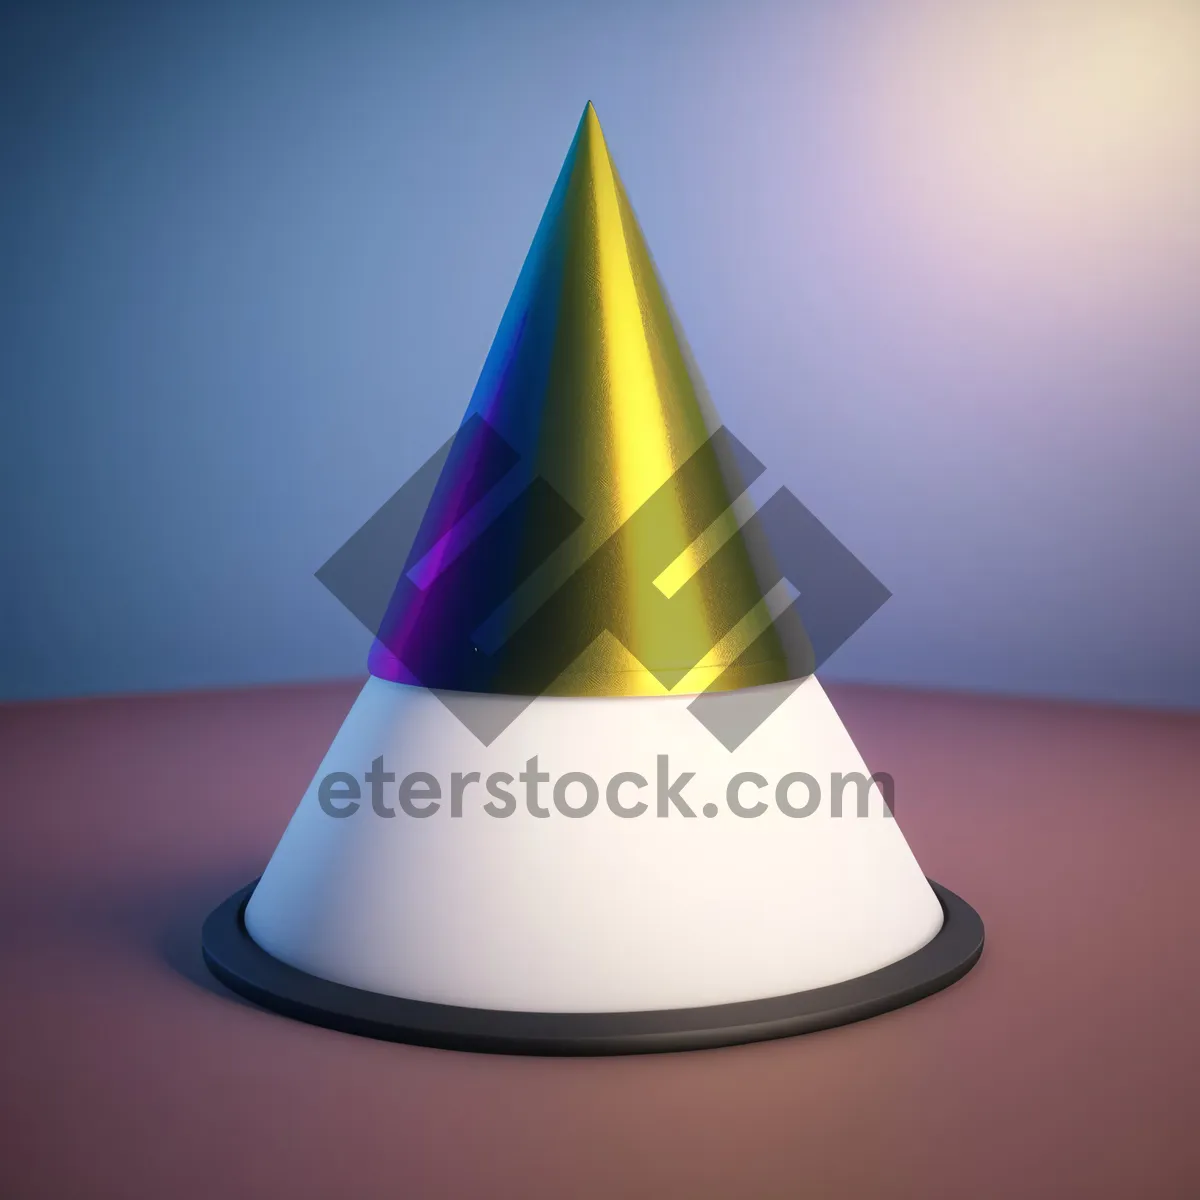 Picture of Cone Symbol - Iconic Sign for Road Safety